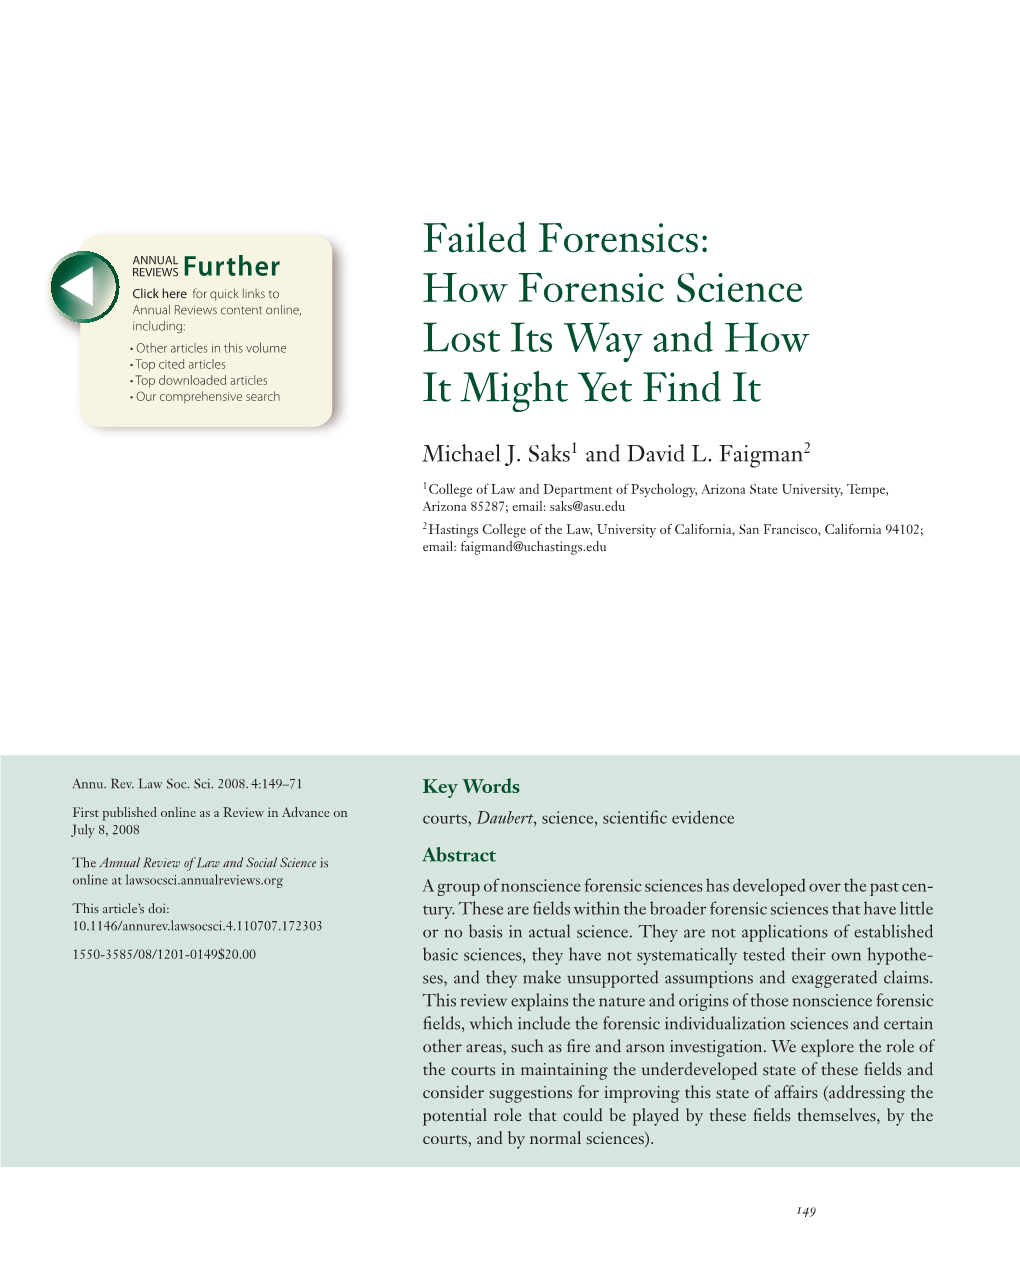 How Forensic Science Lost Its Way and How It Might Yet Find It Michael J